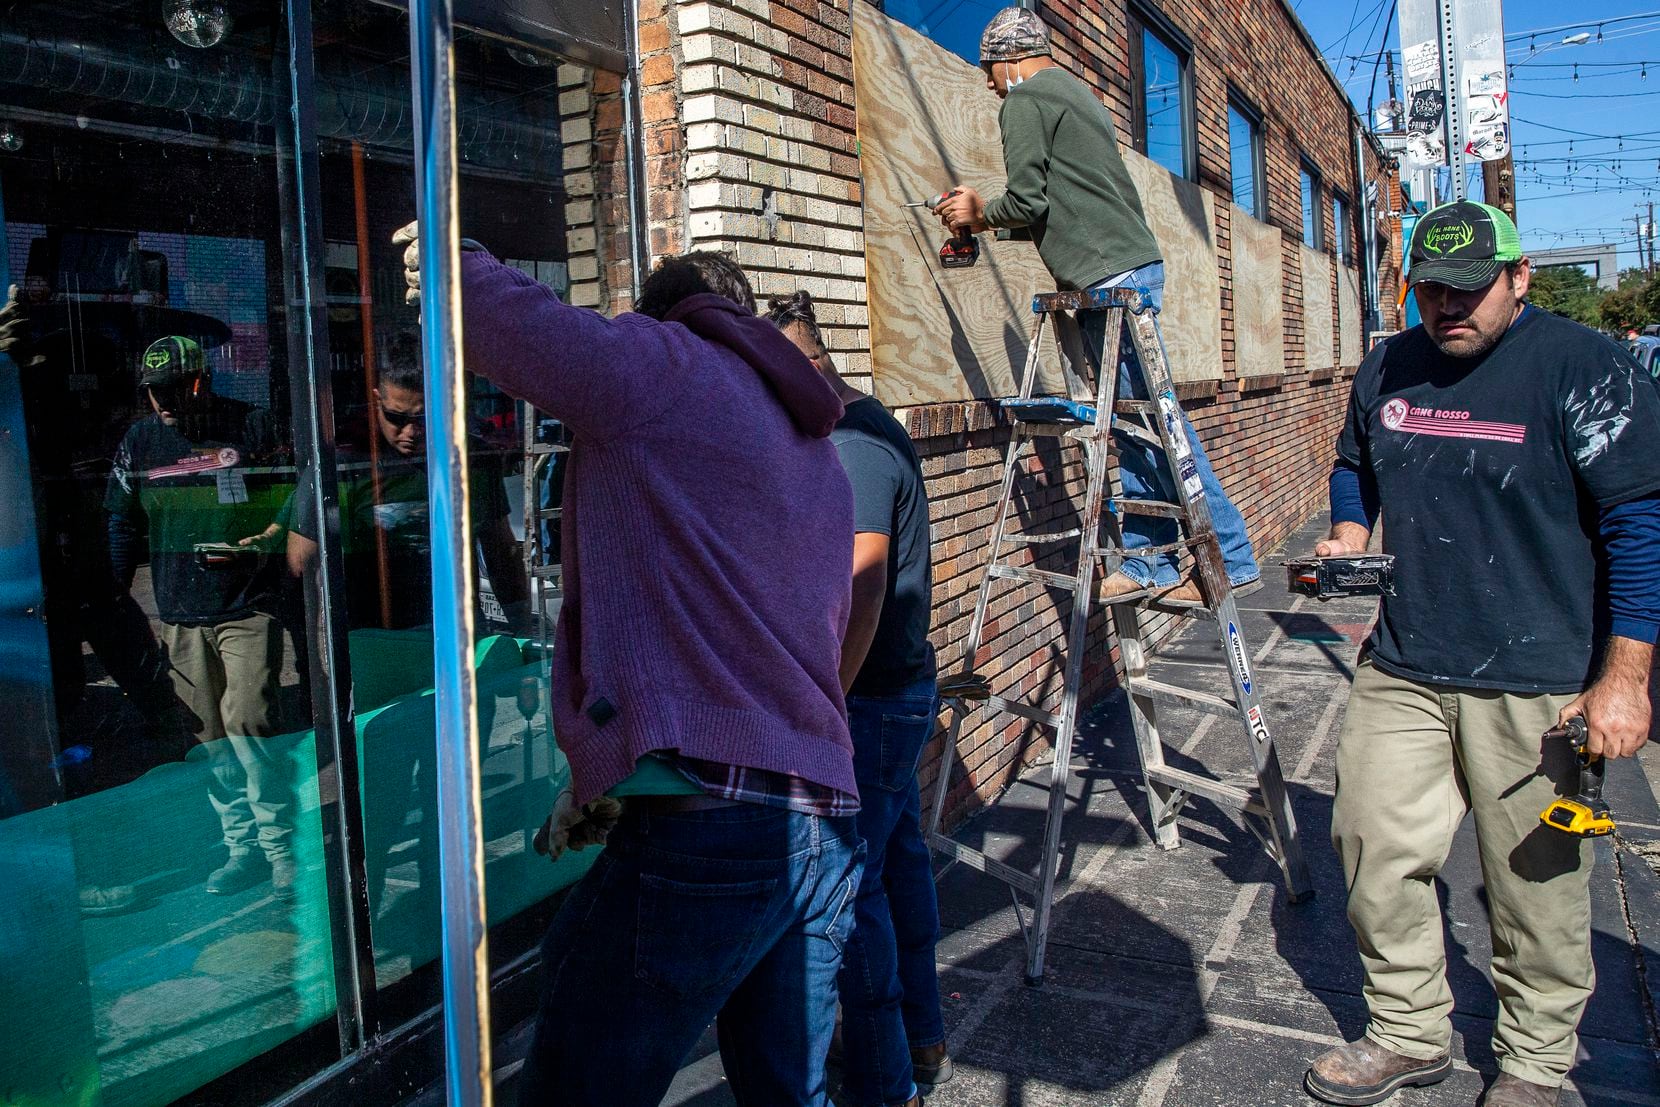 George Hernandez (right) and other employees at Tommy C Construction, LLC, board up the glass windows at Crowdus Bar in Deep Ellum in Dallas on Monday, Nov. 2, 2020. Businesses throughout Deep Ellum and downtown Dallas hired various contractors to board up their buildings to deter against possible looting that might occur after the general election. (Lynda M. González/The Dallas Morning News)